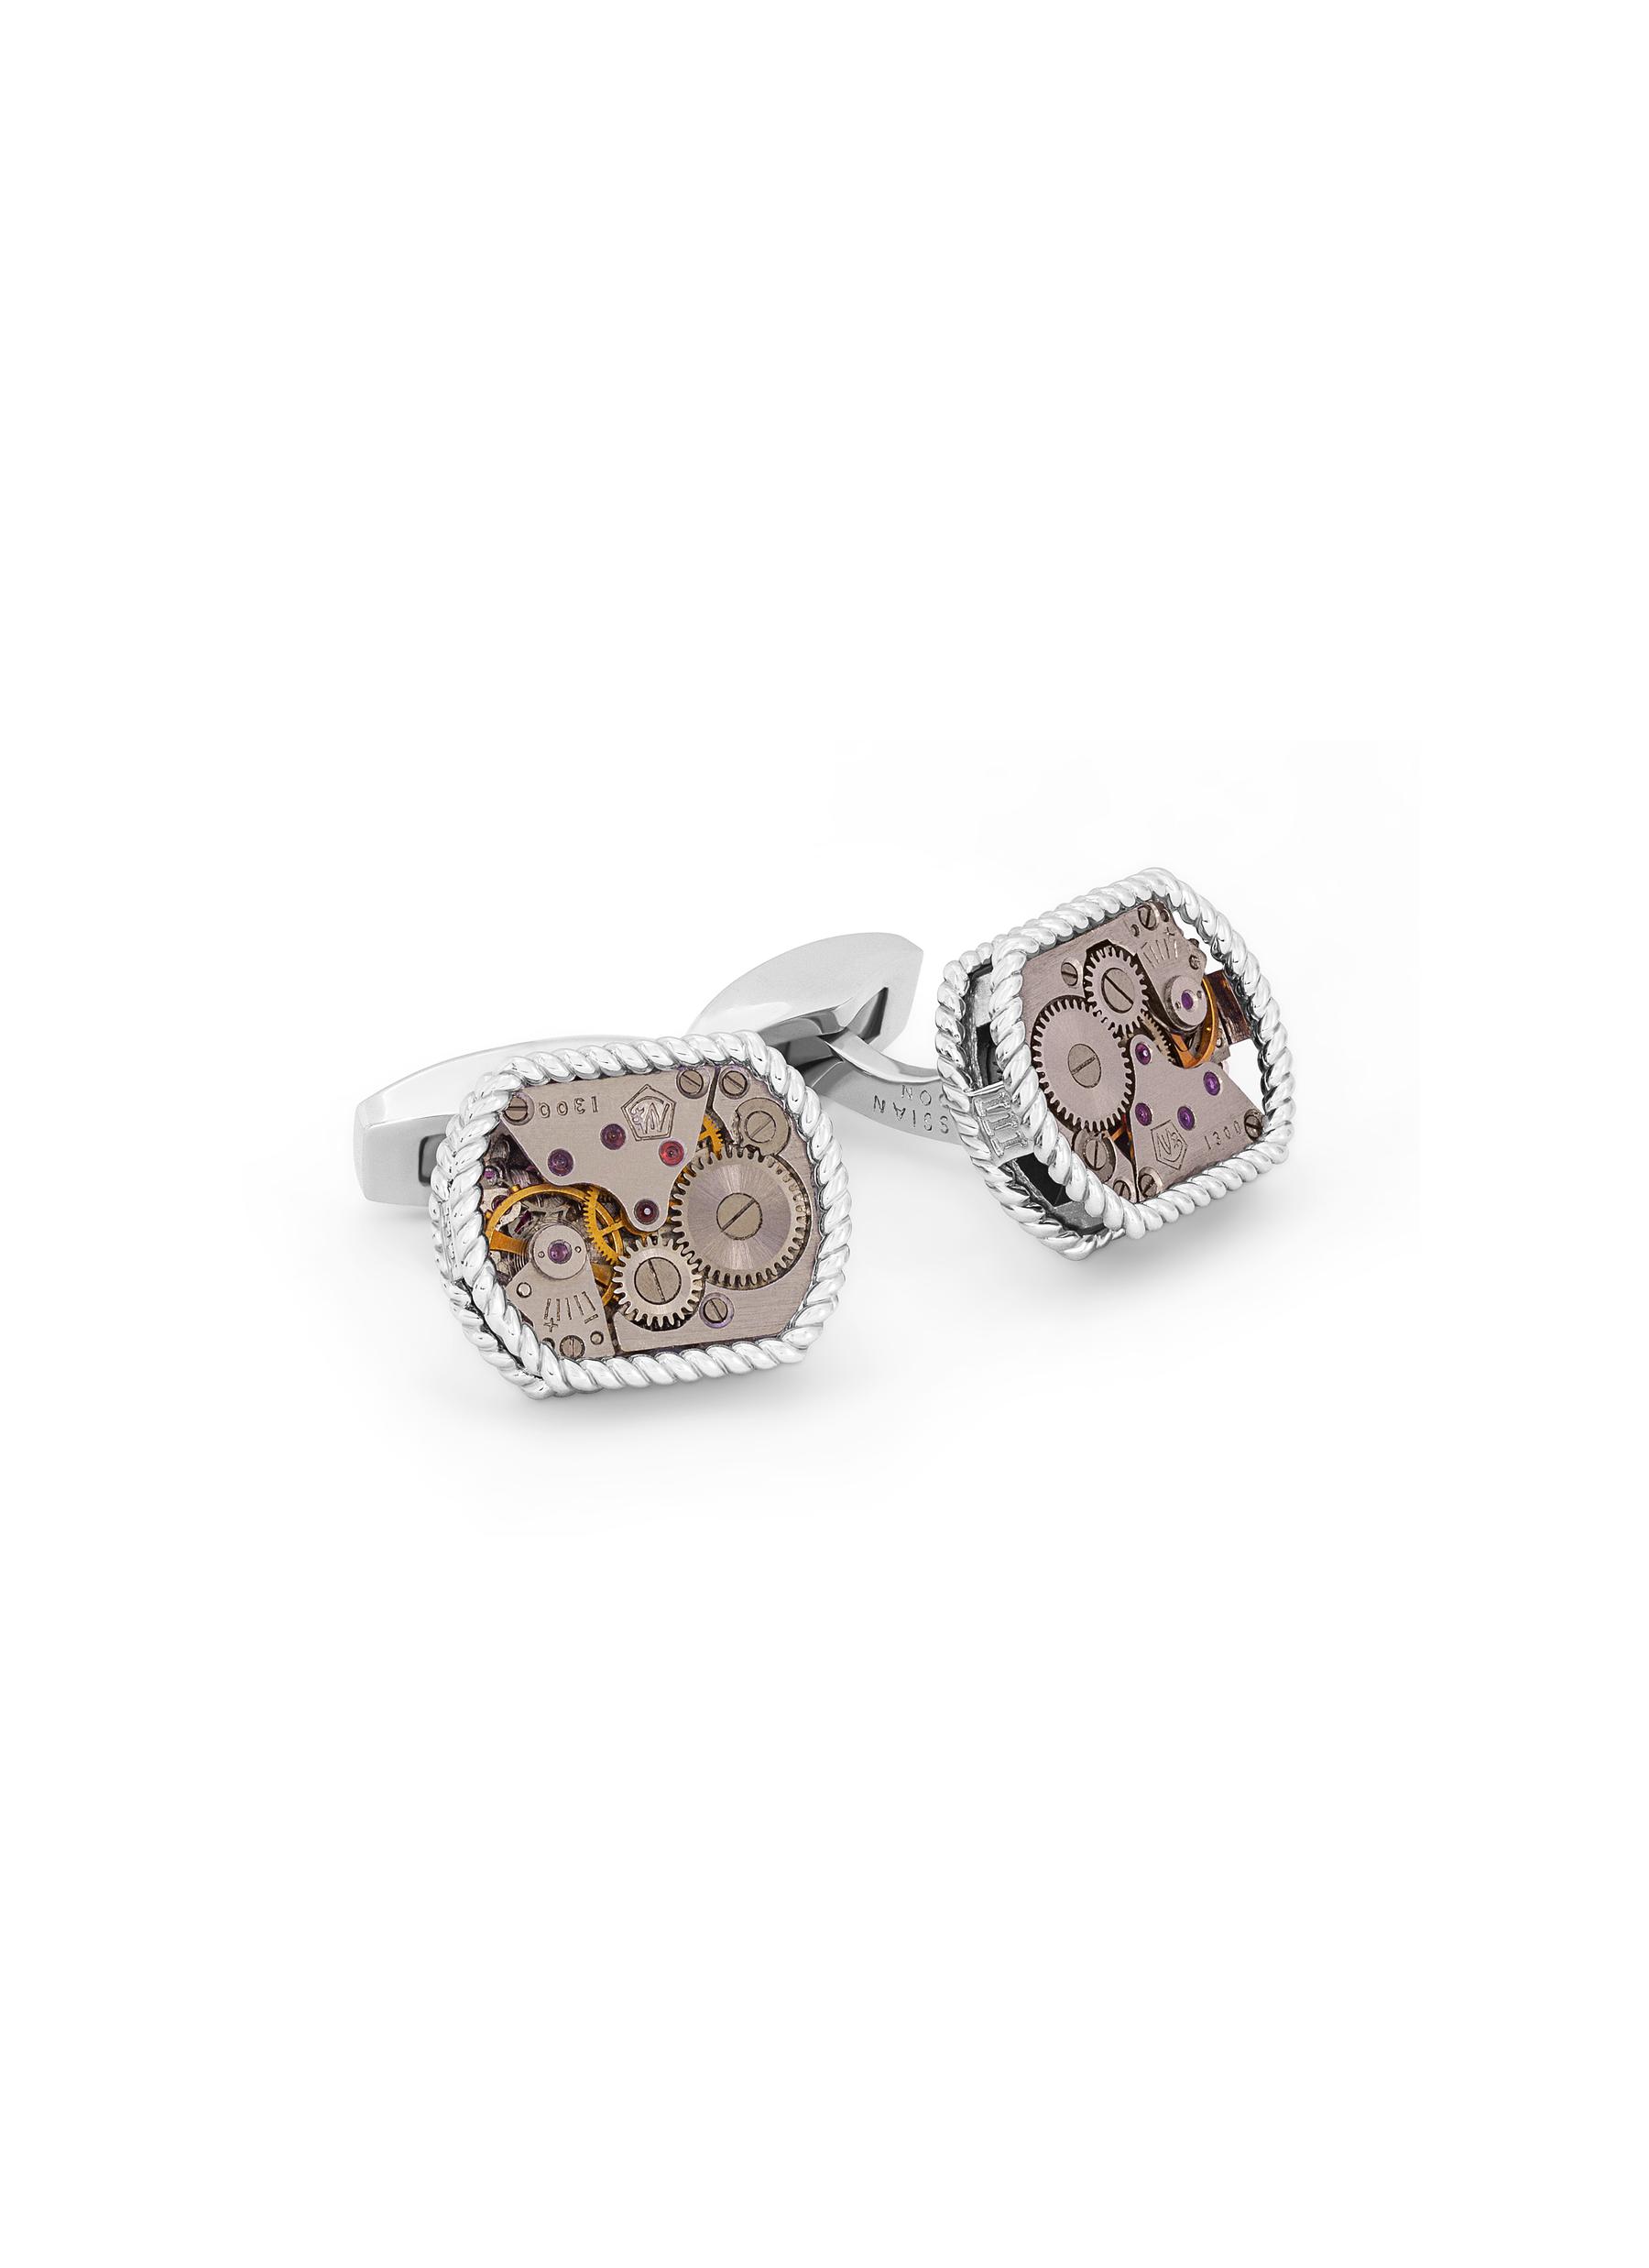 LIMITED EDITION RHODIUM PLATED STERLING SILVER CASE 17 JEWELS CABLE DETAILING CUFFLINKS